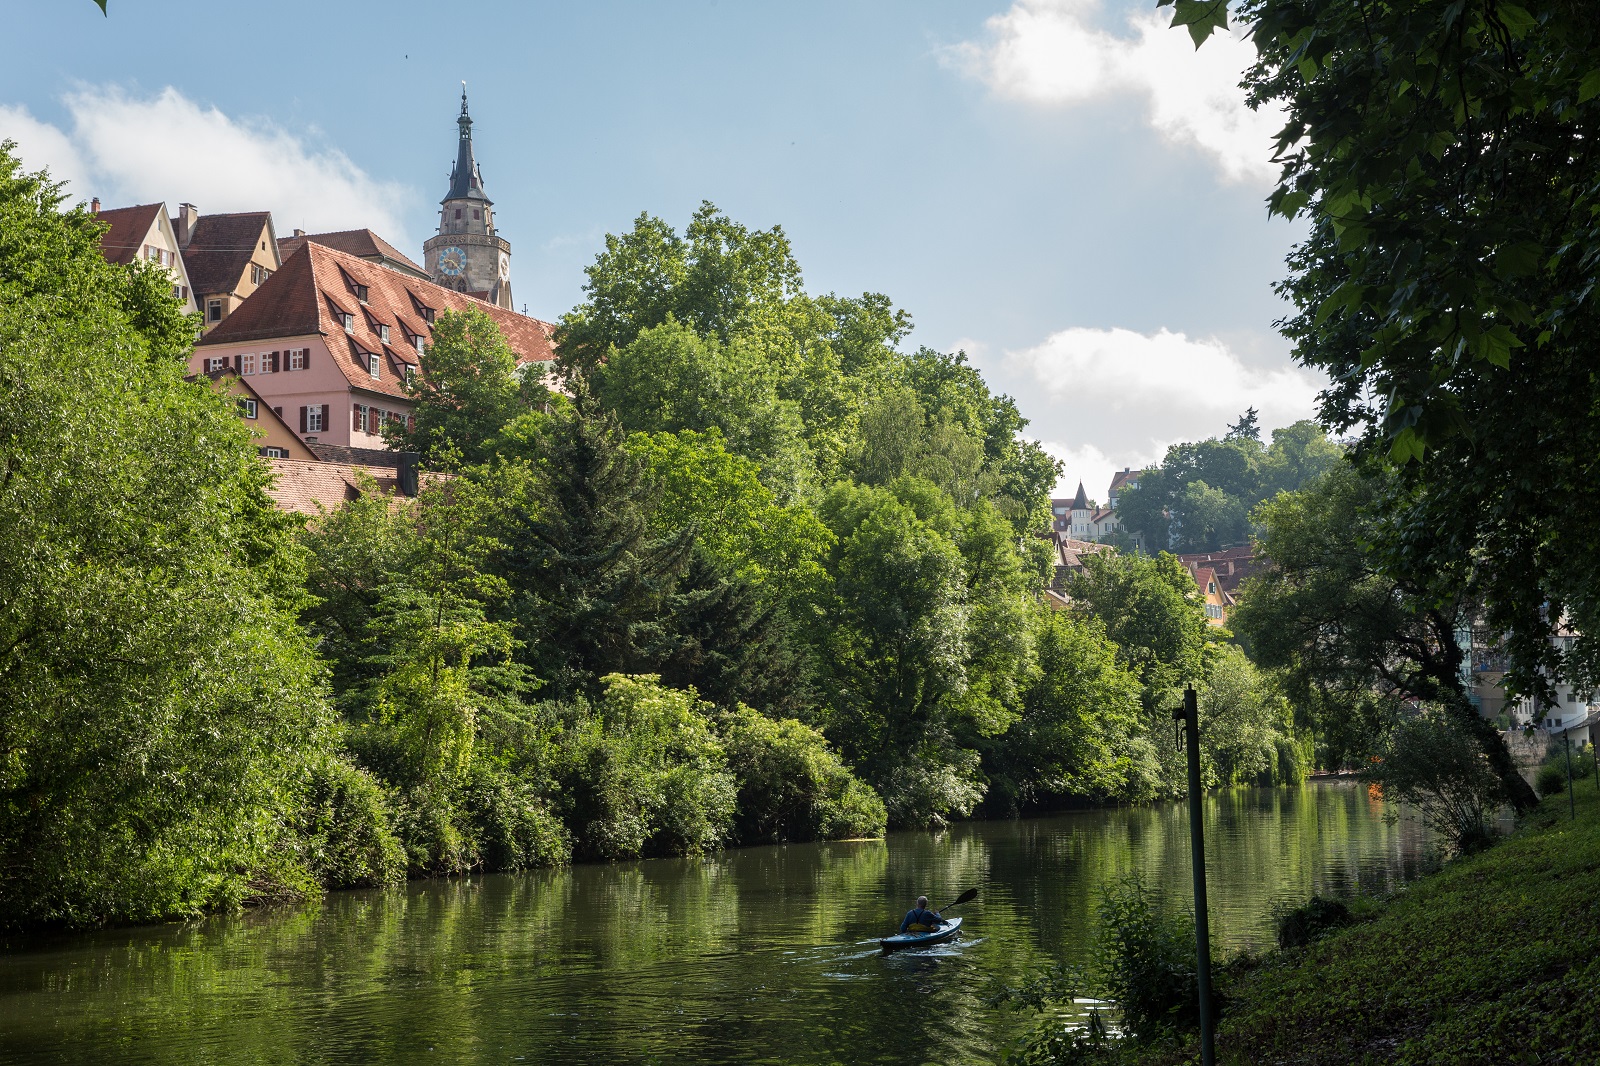 In the foreground the Neckar, the bank with trees, and in the background the old town and the Stiftskirche church